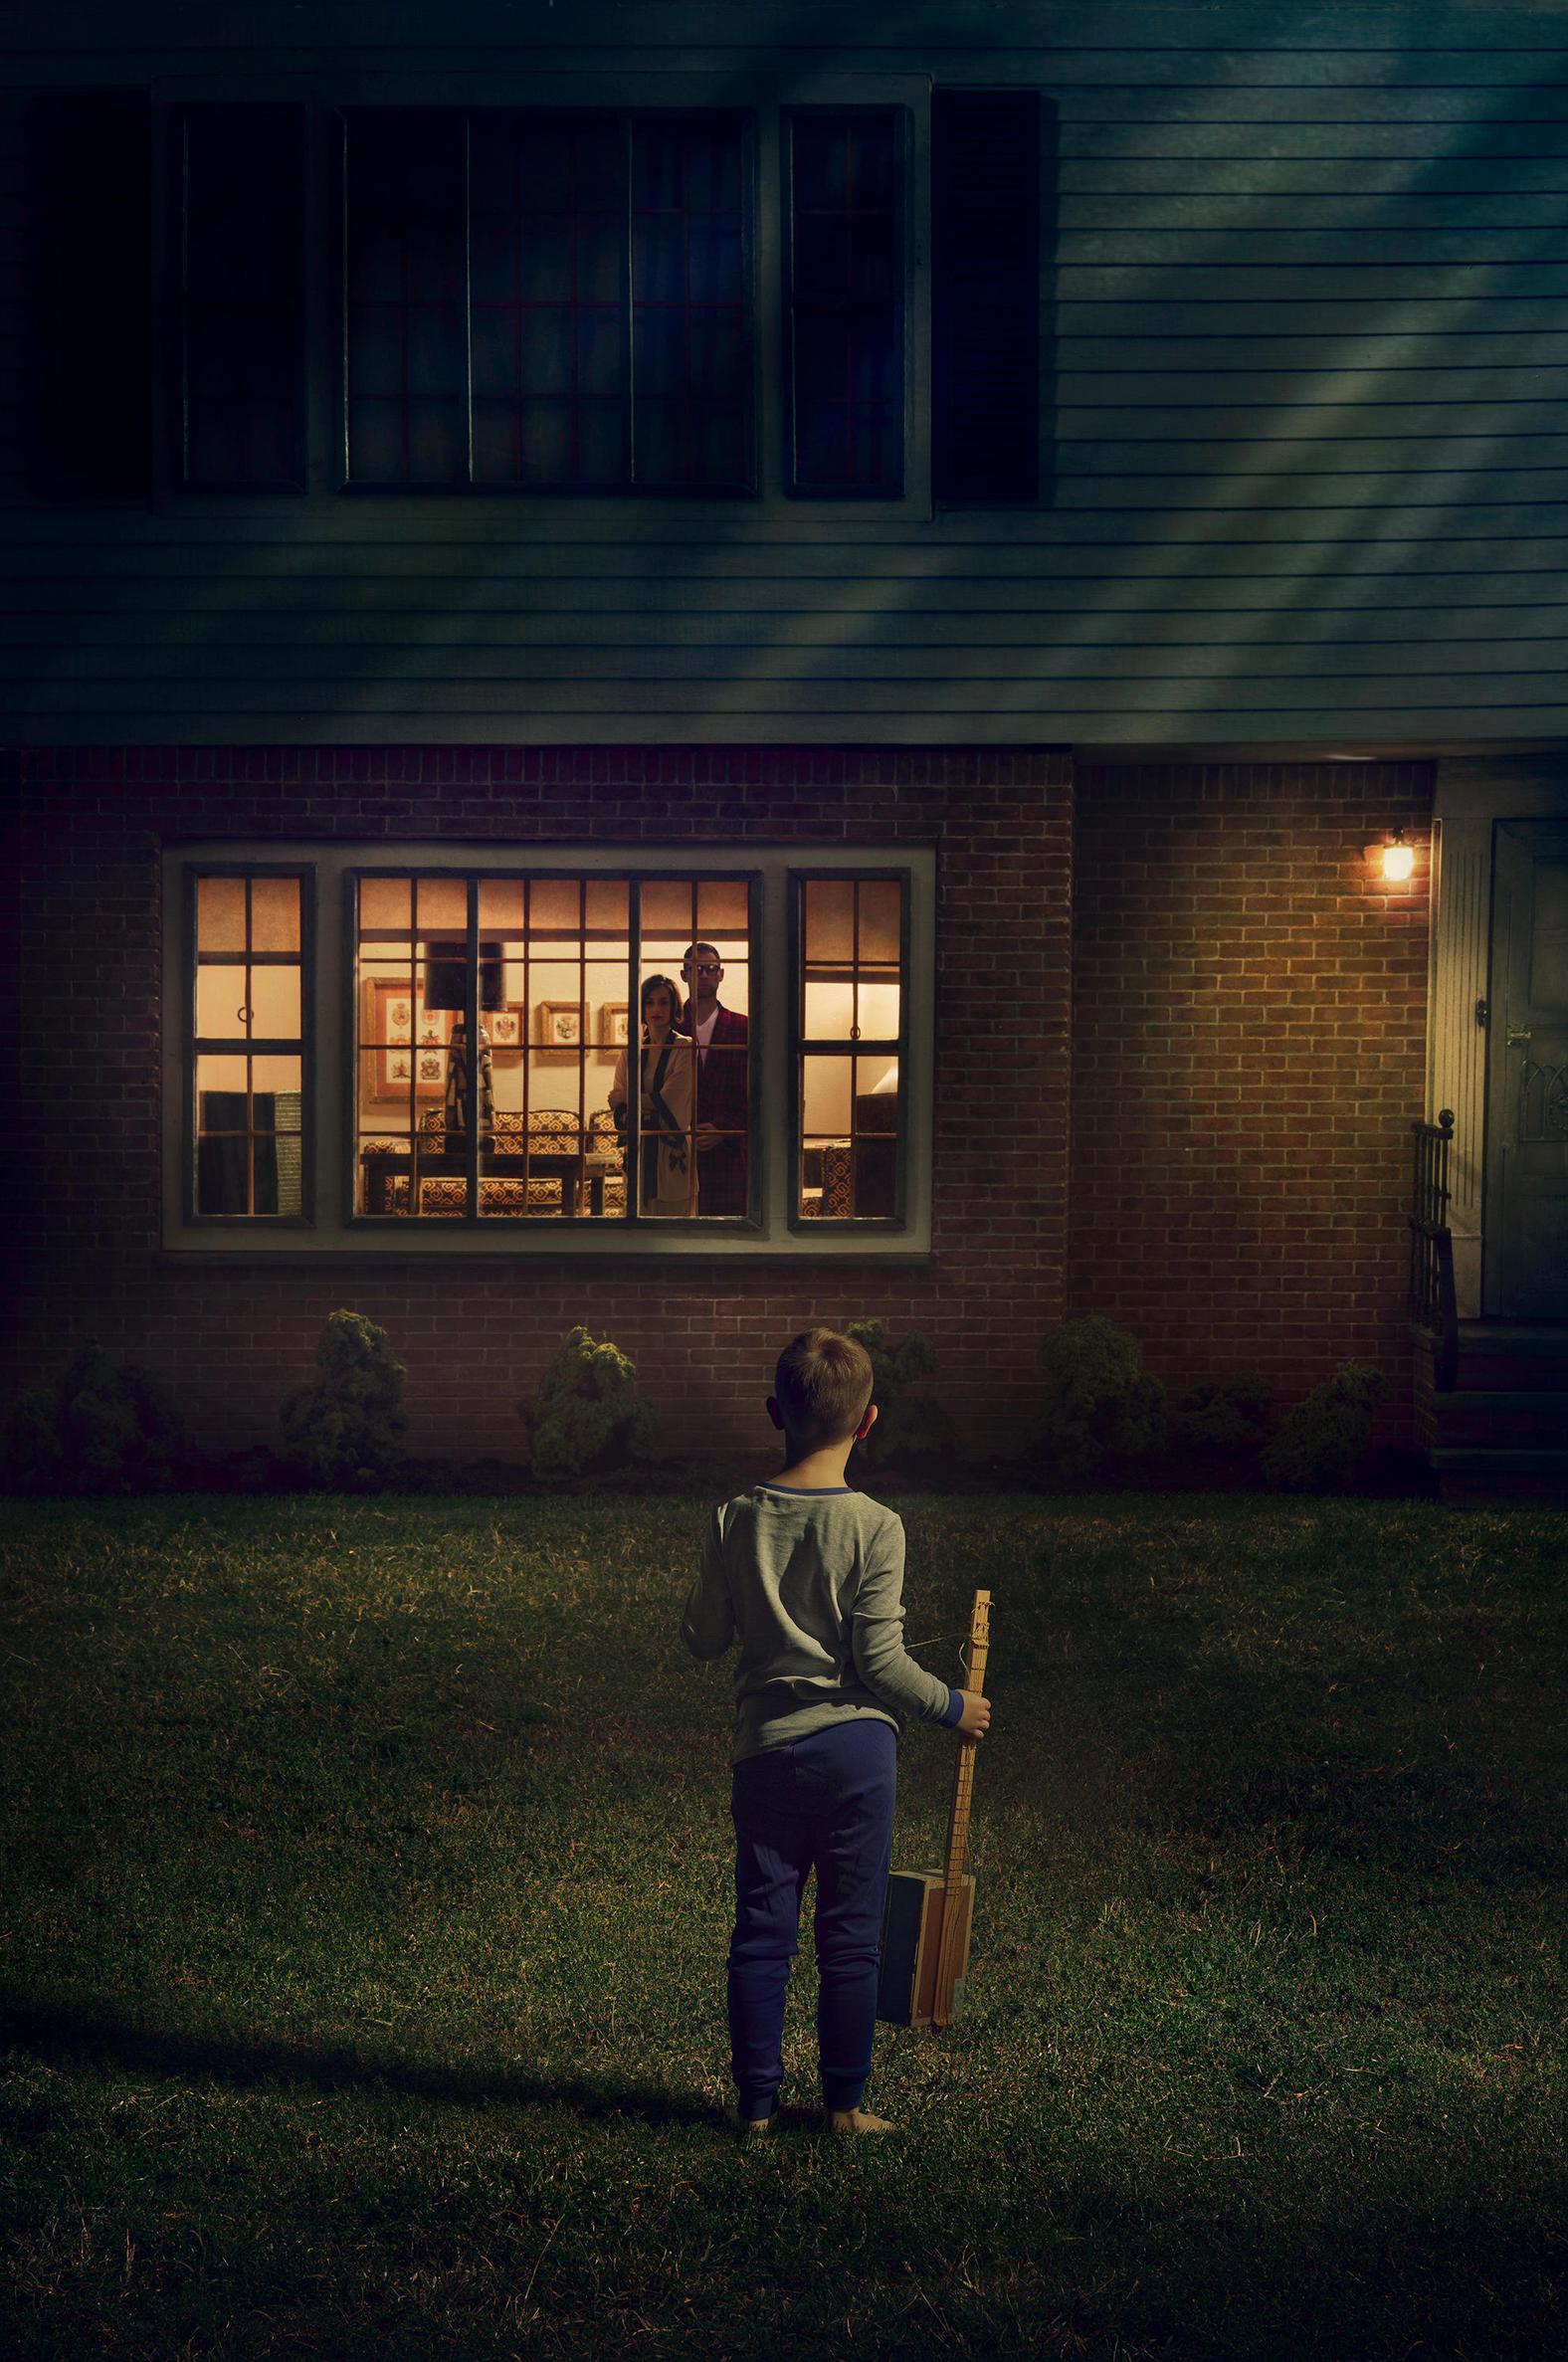 Richard Tuschman Color Photograph - On the Lawn at Night